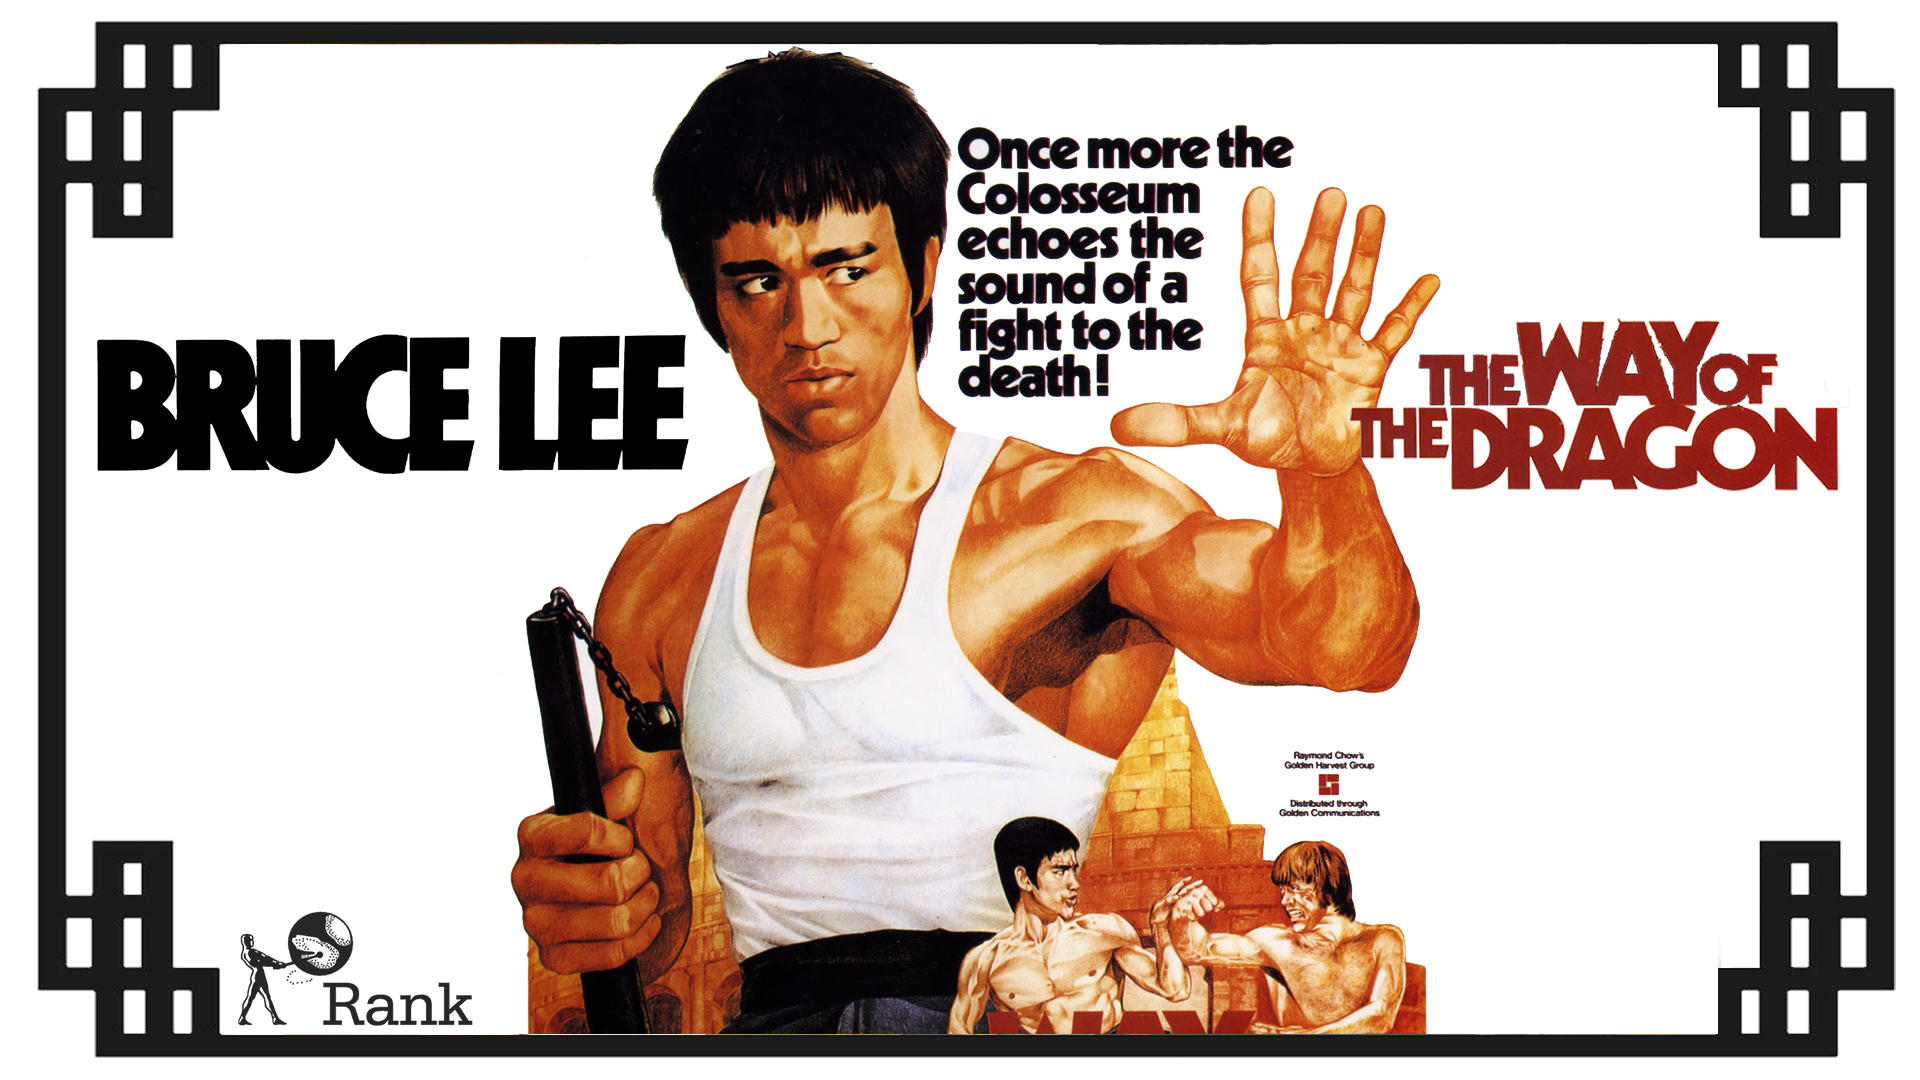 the, Way, Of, The, Dragon, Martial, Arts, Bruce, Lee, Poster Wallpaper